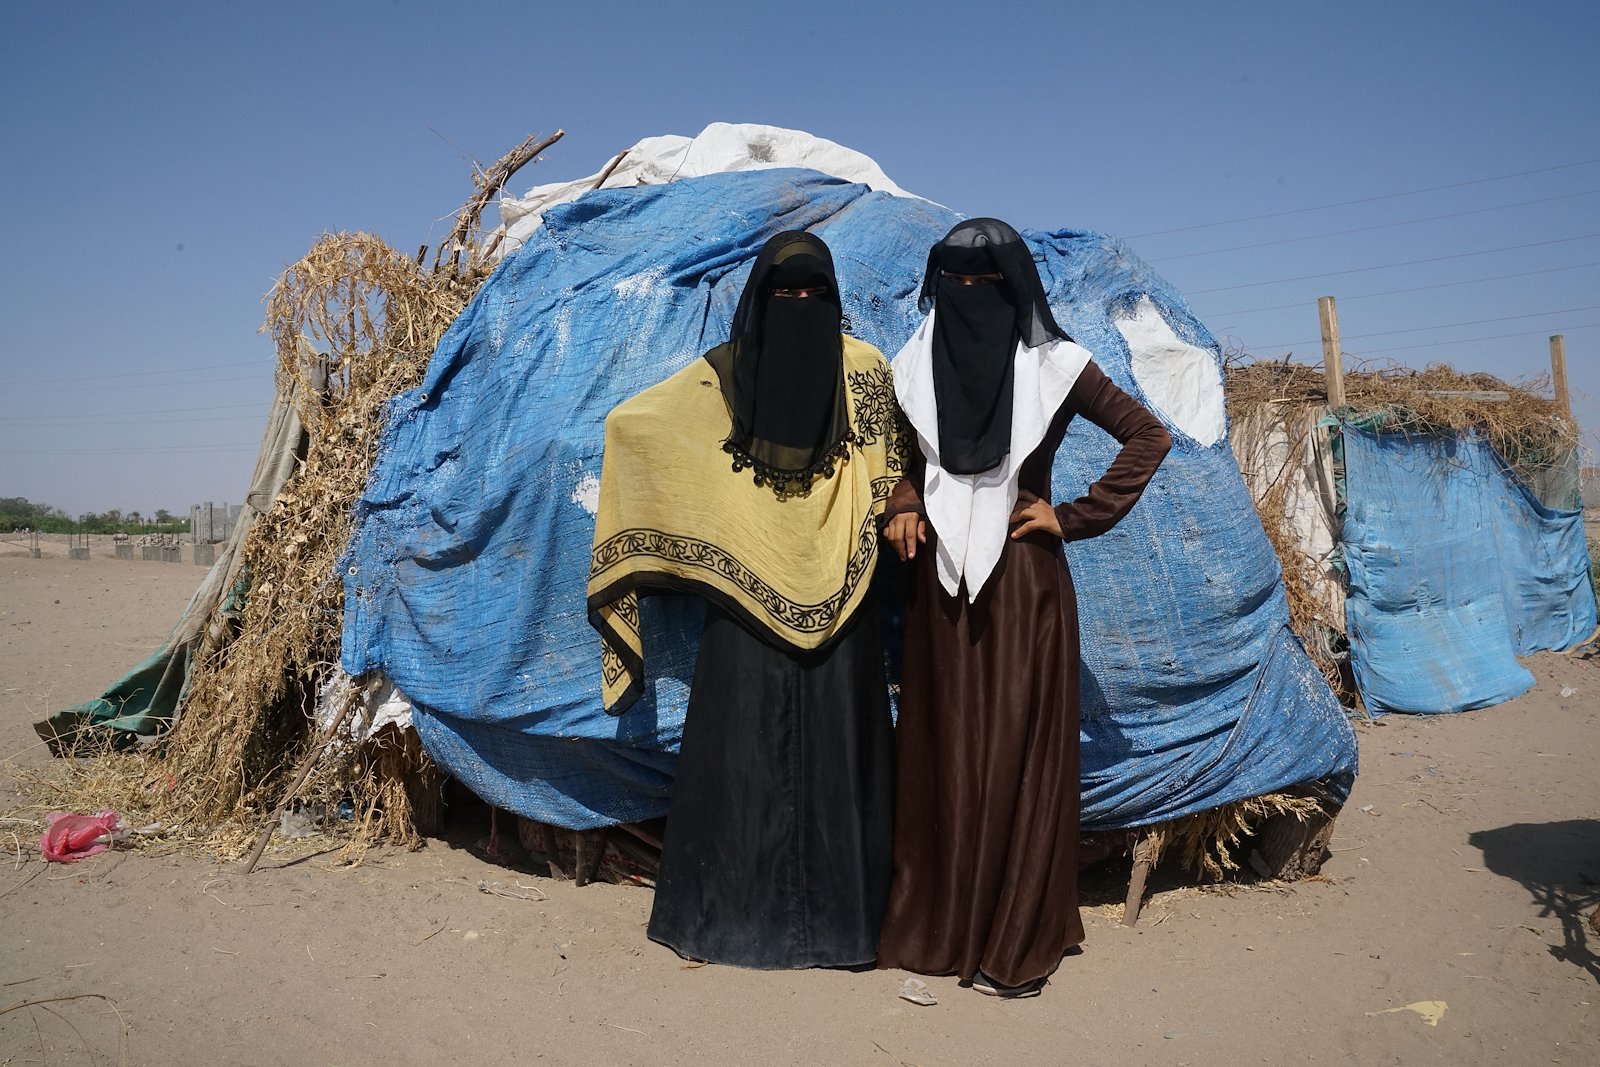 Two recently displaced Yemeni women in front of their shack in a desert camp in Aden, south Yemen. Credit: UNOCHA/Giles Clarke